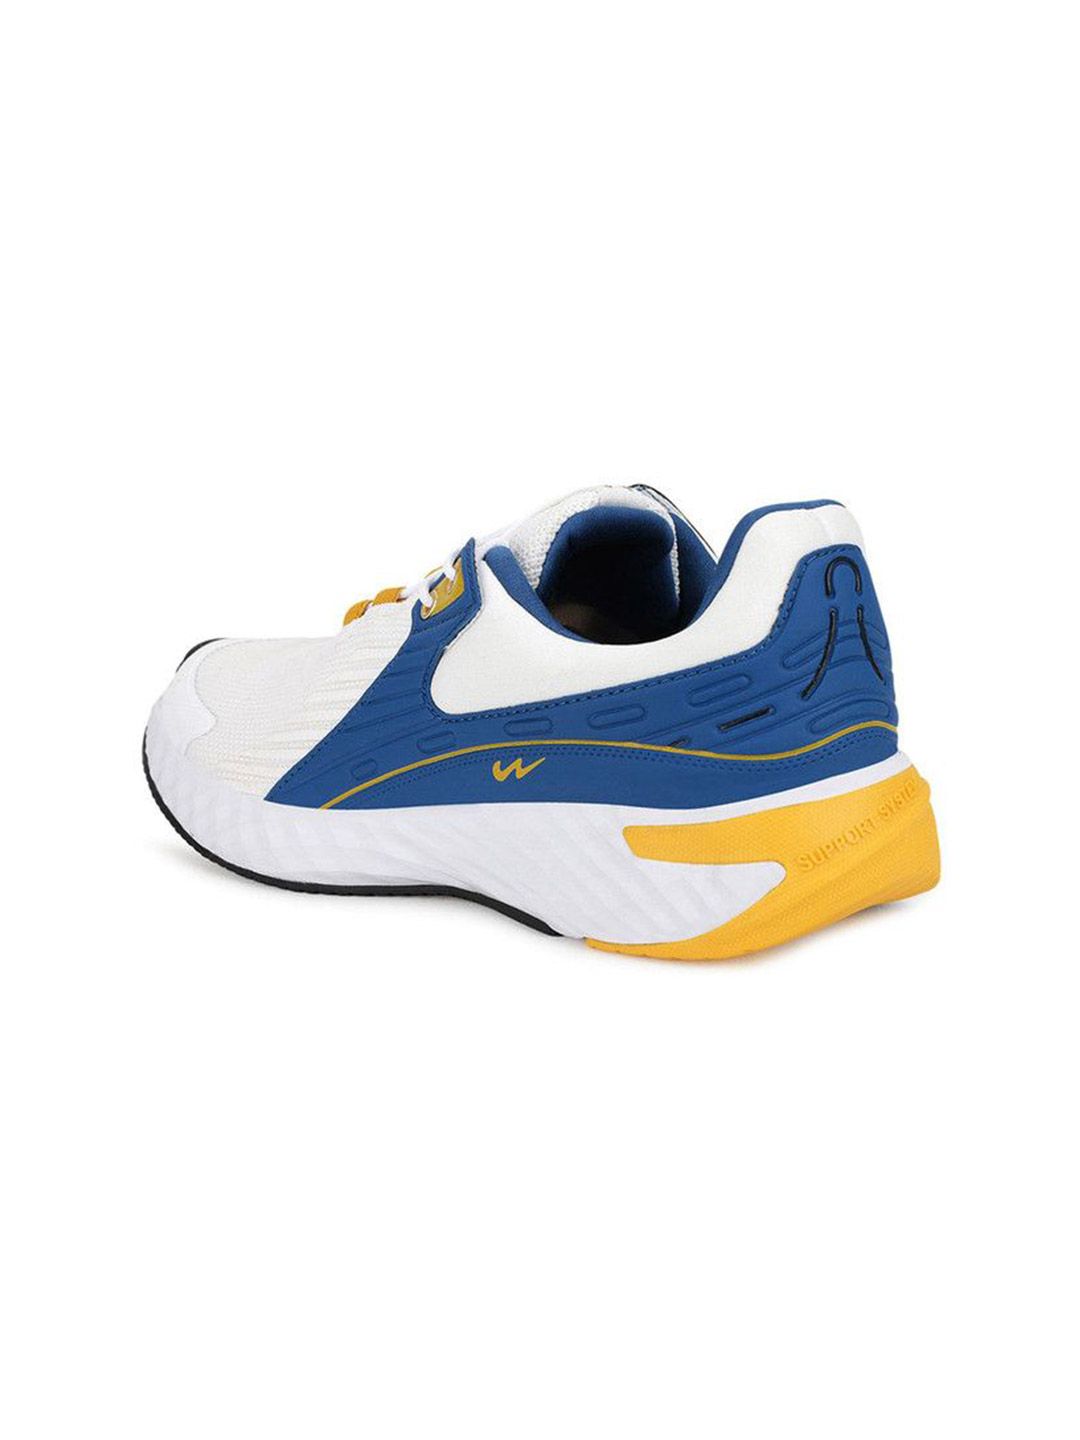 Buy Men Rocket Pro Off White Running Shoes From Fancode Shop.